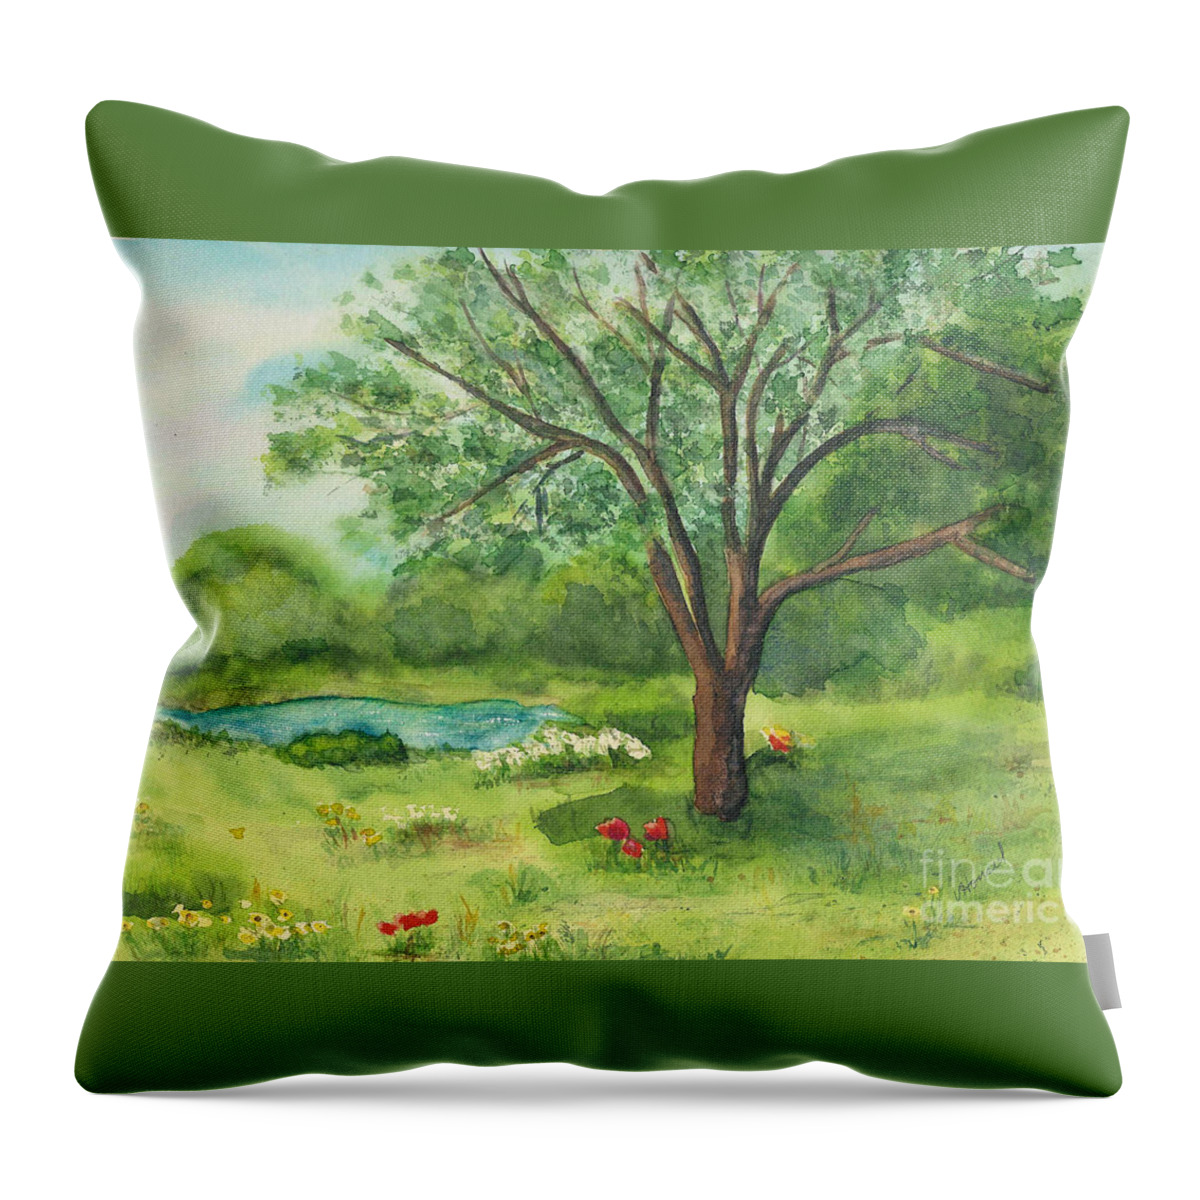 Landscape Throw Pillow featuring the painting Pedro's Tree by Vicki Housel